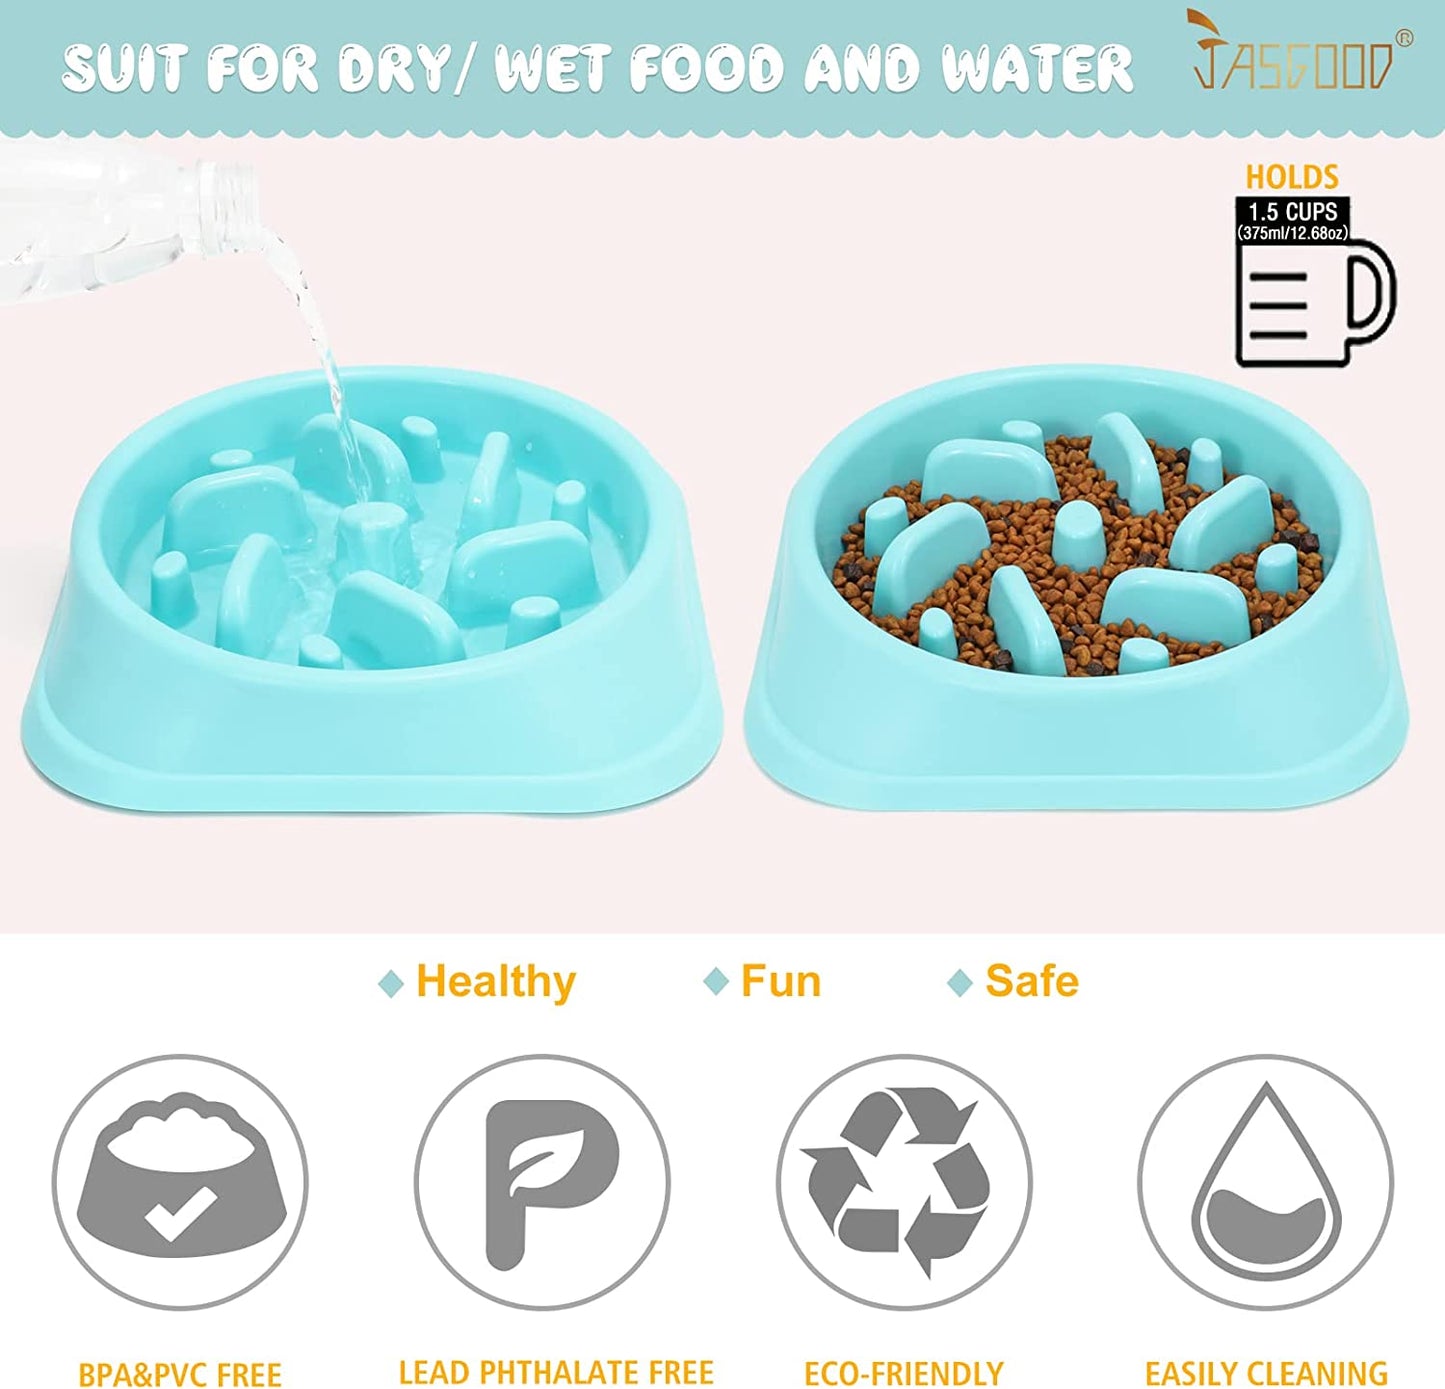 "Ultimate Slow Feeder Bowl for Dogs - Promotes Healthy Eating, Prevents Choking and Bloat, Eco-Friendly and Durable Design!"